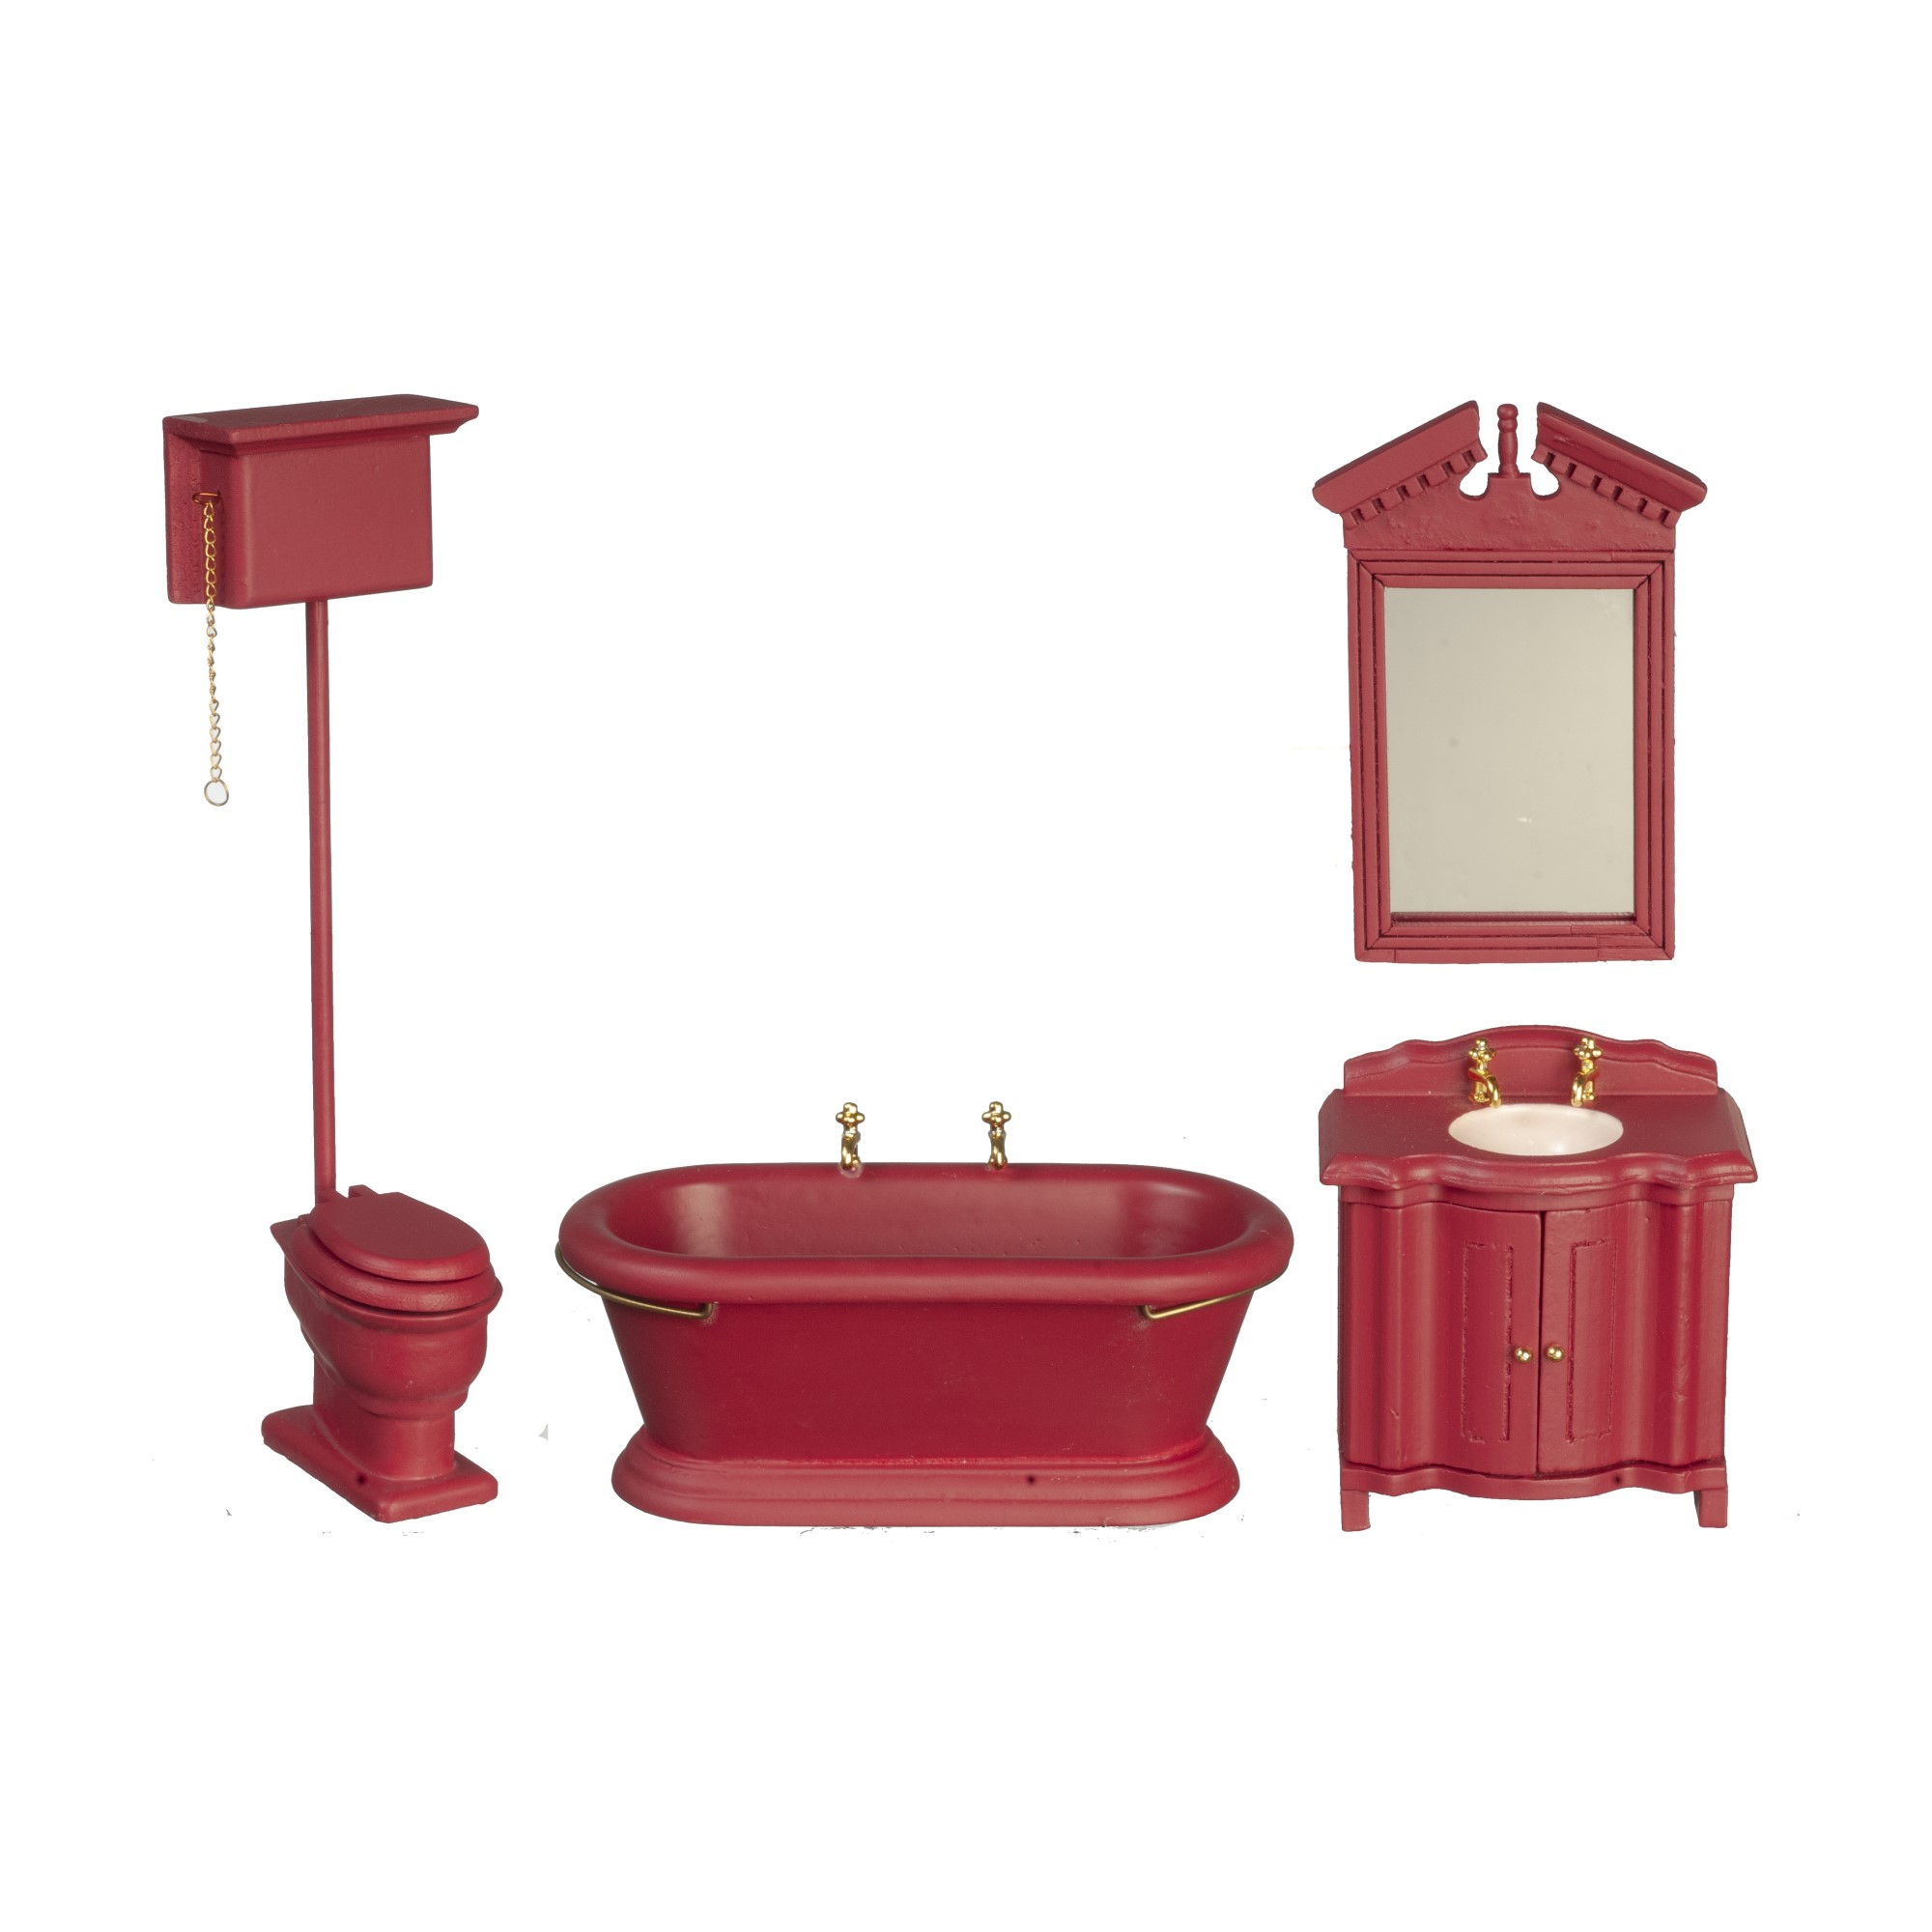 Old Fashioned Mahagony Bathroom Furniture Set by Town Square